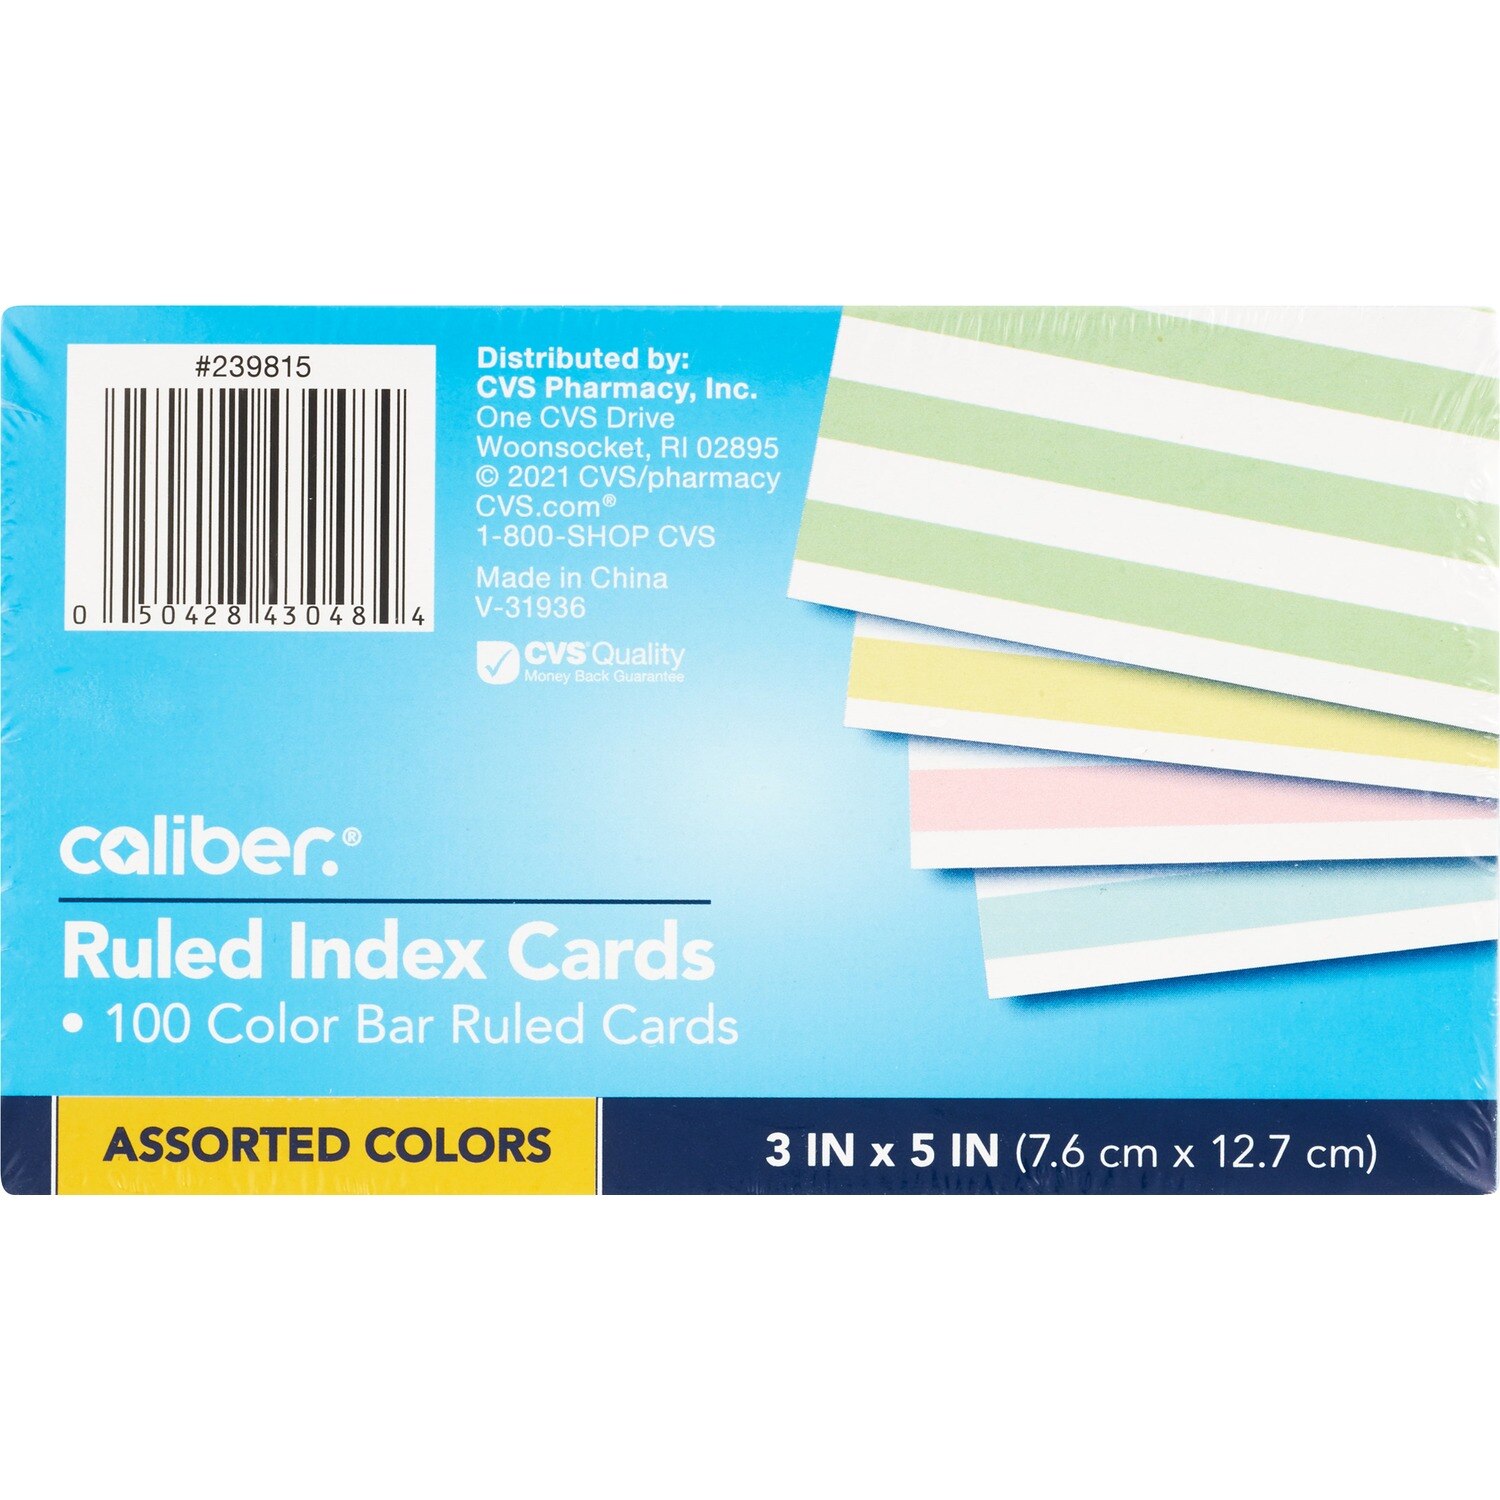 Caliber Ruled Index Cards, Assorted Colors, 3 in. x 5 in., 100 CT